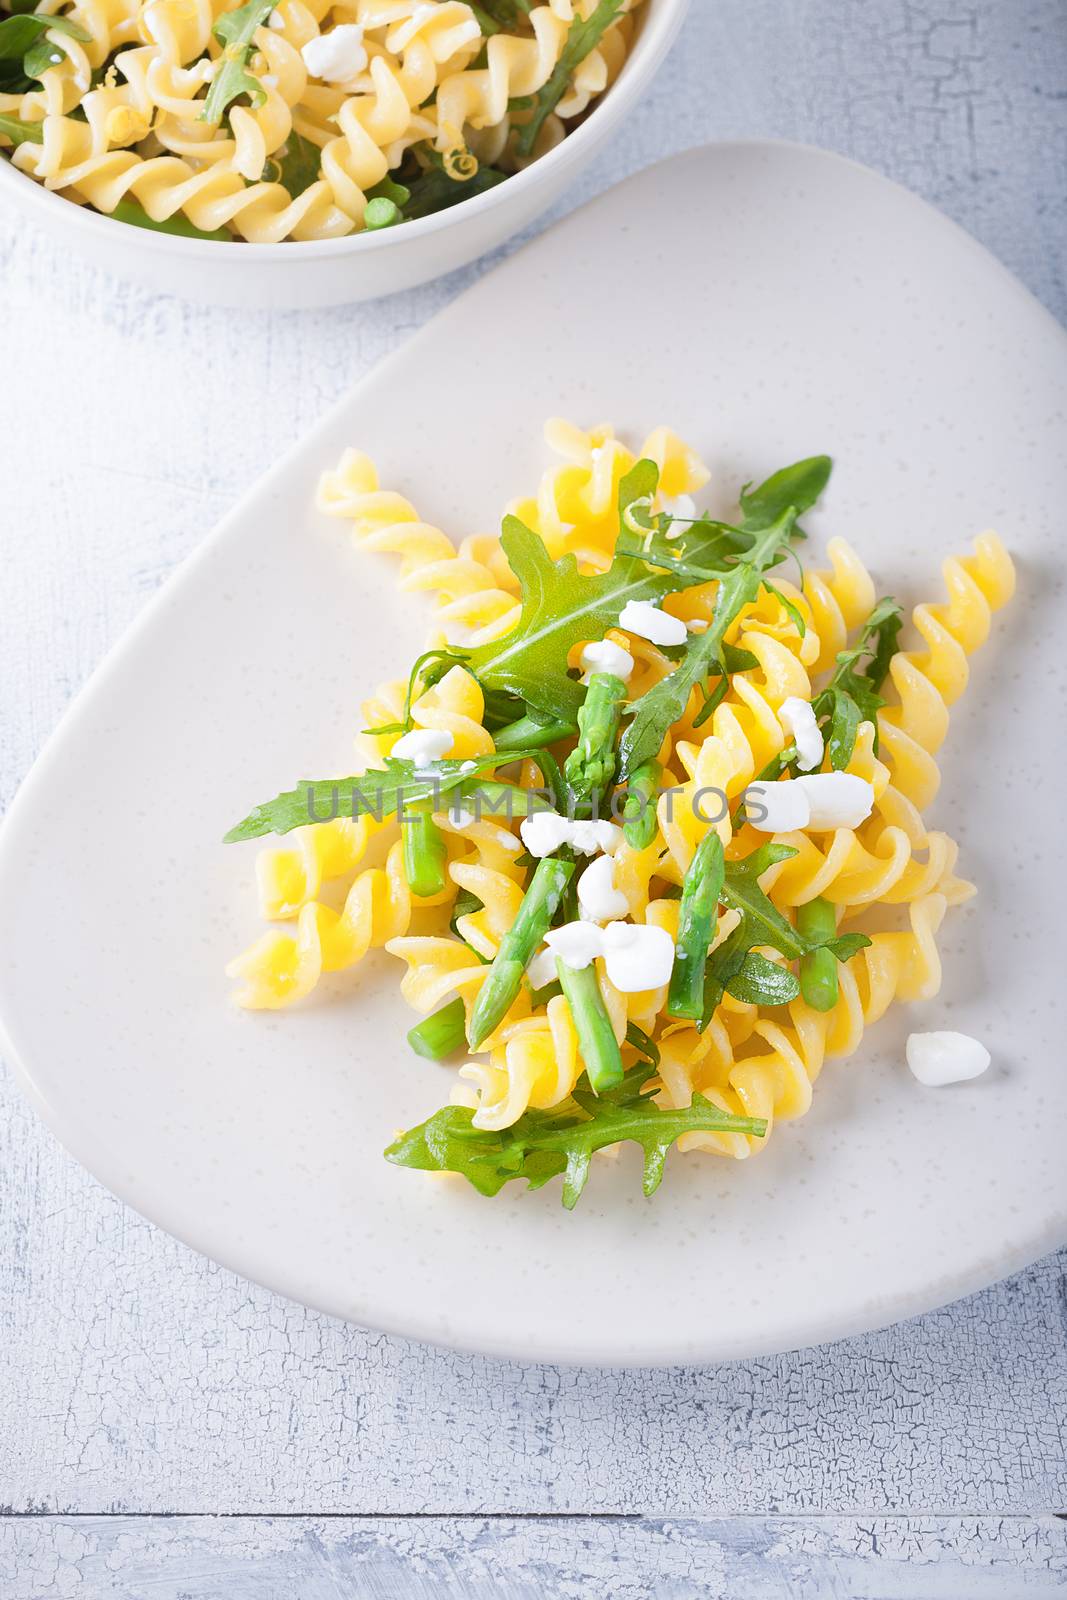 Pasta salad with asparagus and arugula on a white plate